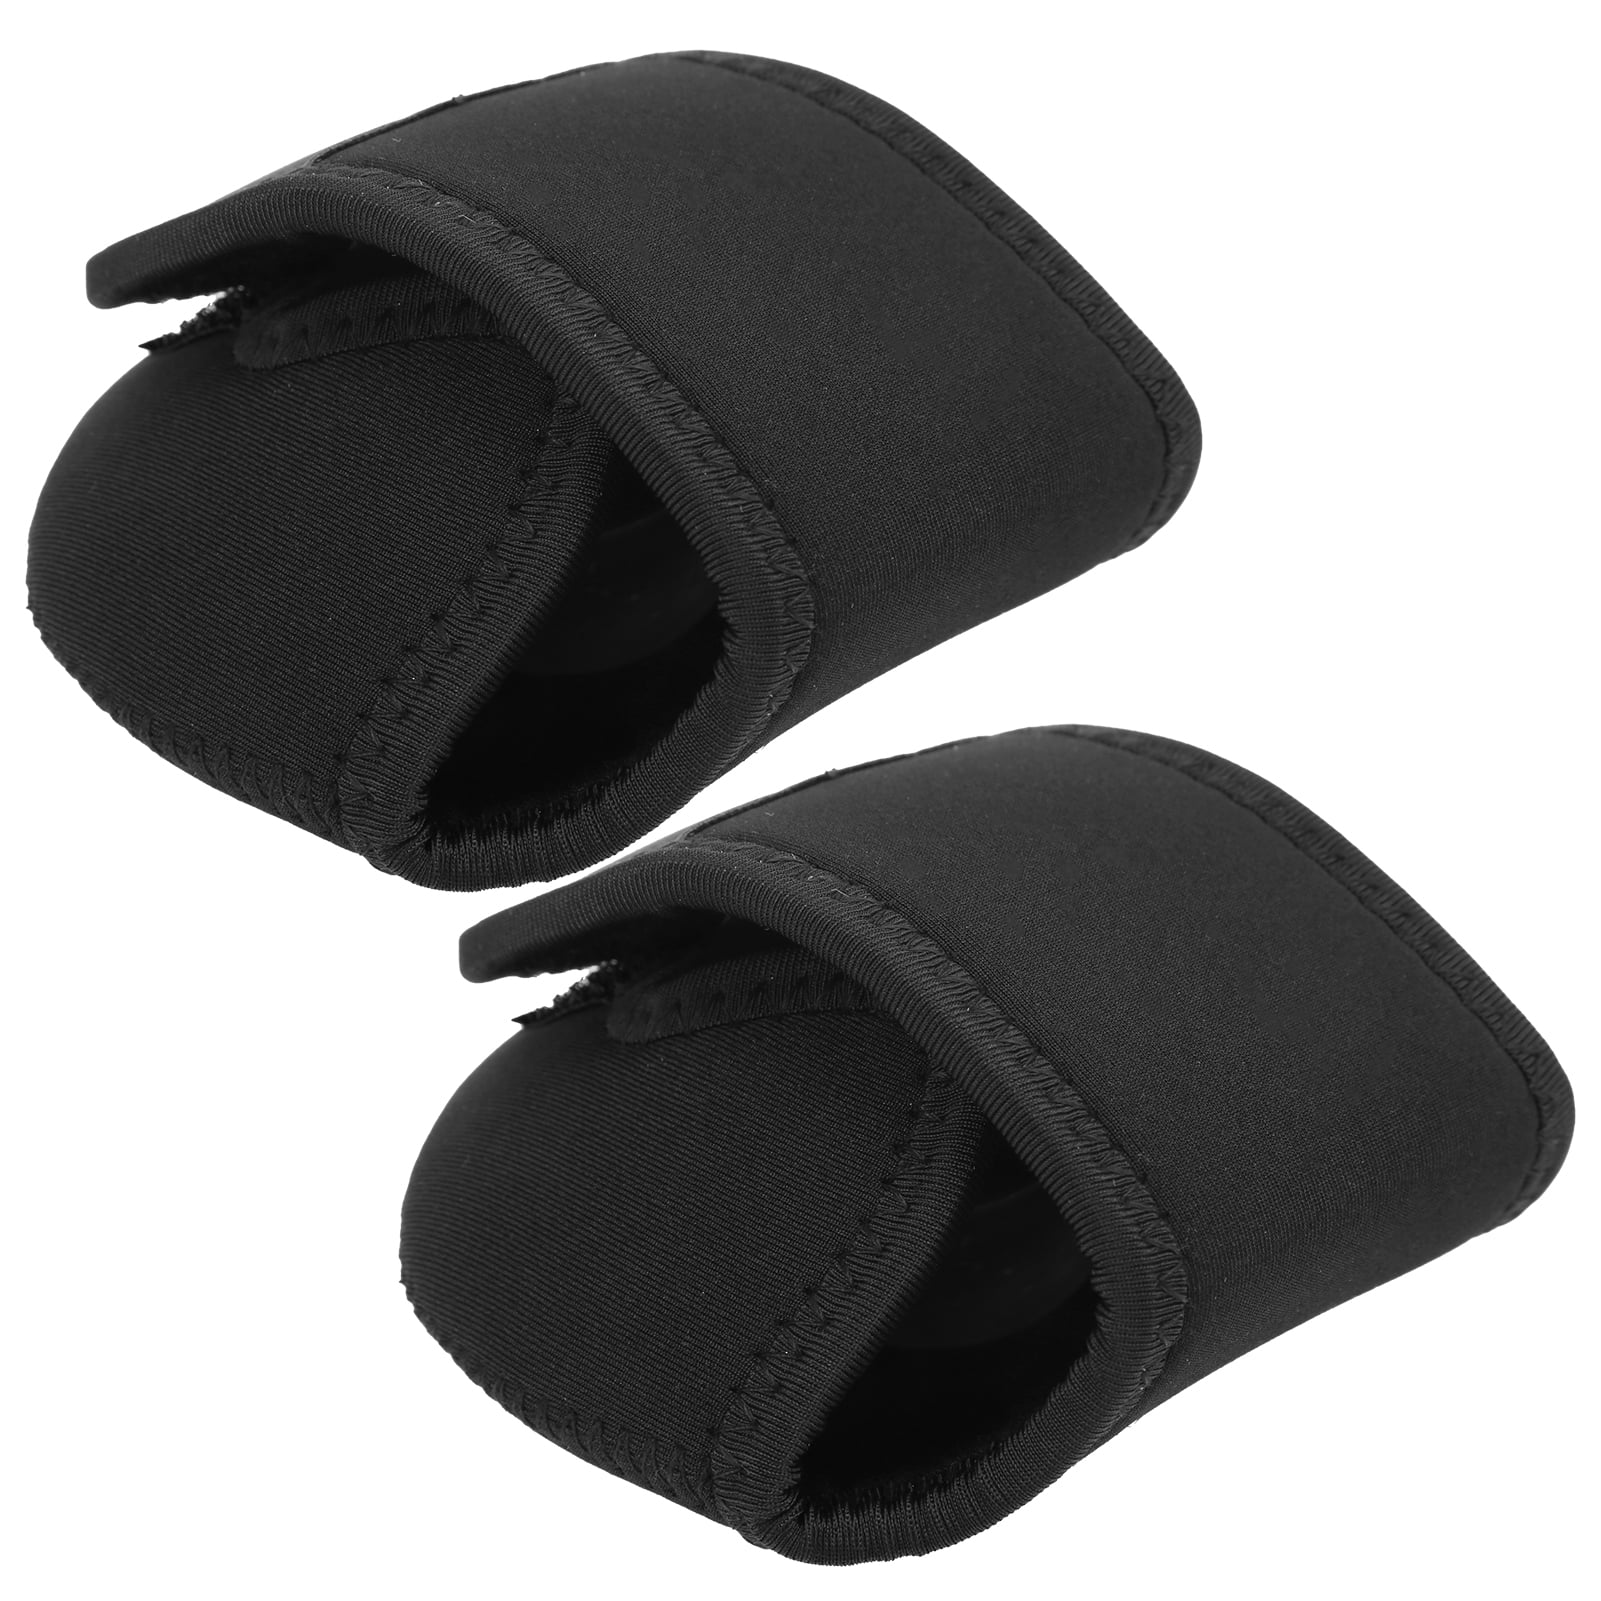 Baitcasting Reel Cover 2Pcs Baitcasting Reel Cover Case Protector Water-Proof Baitcast Reel Protective Case Pouch